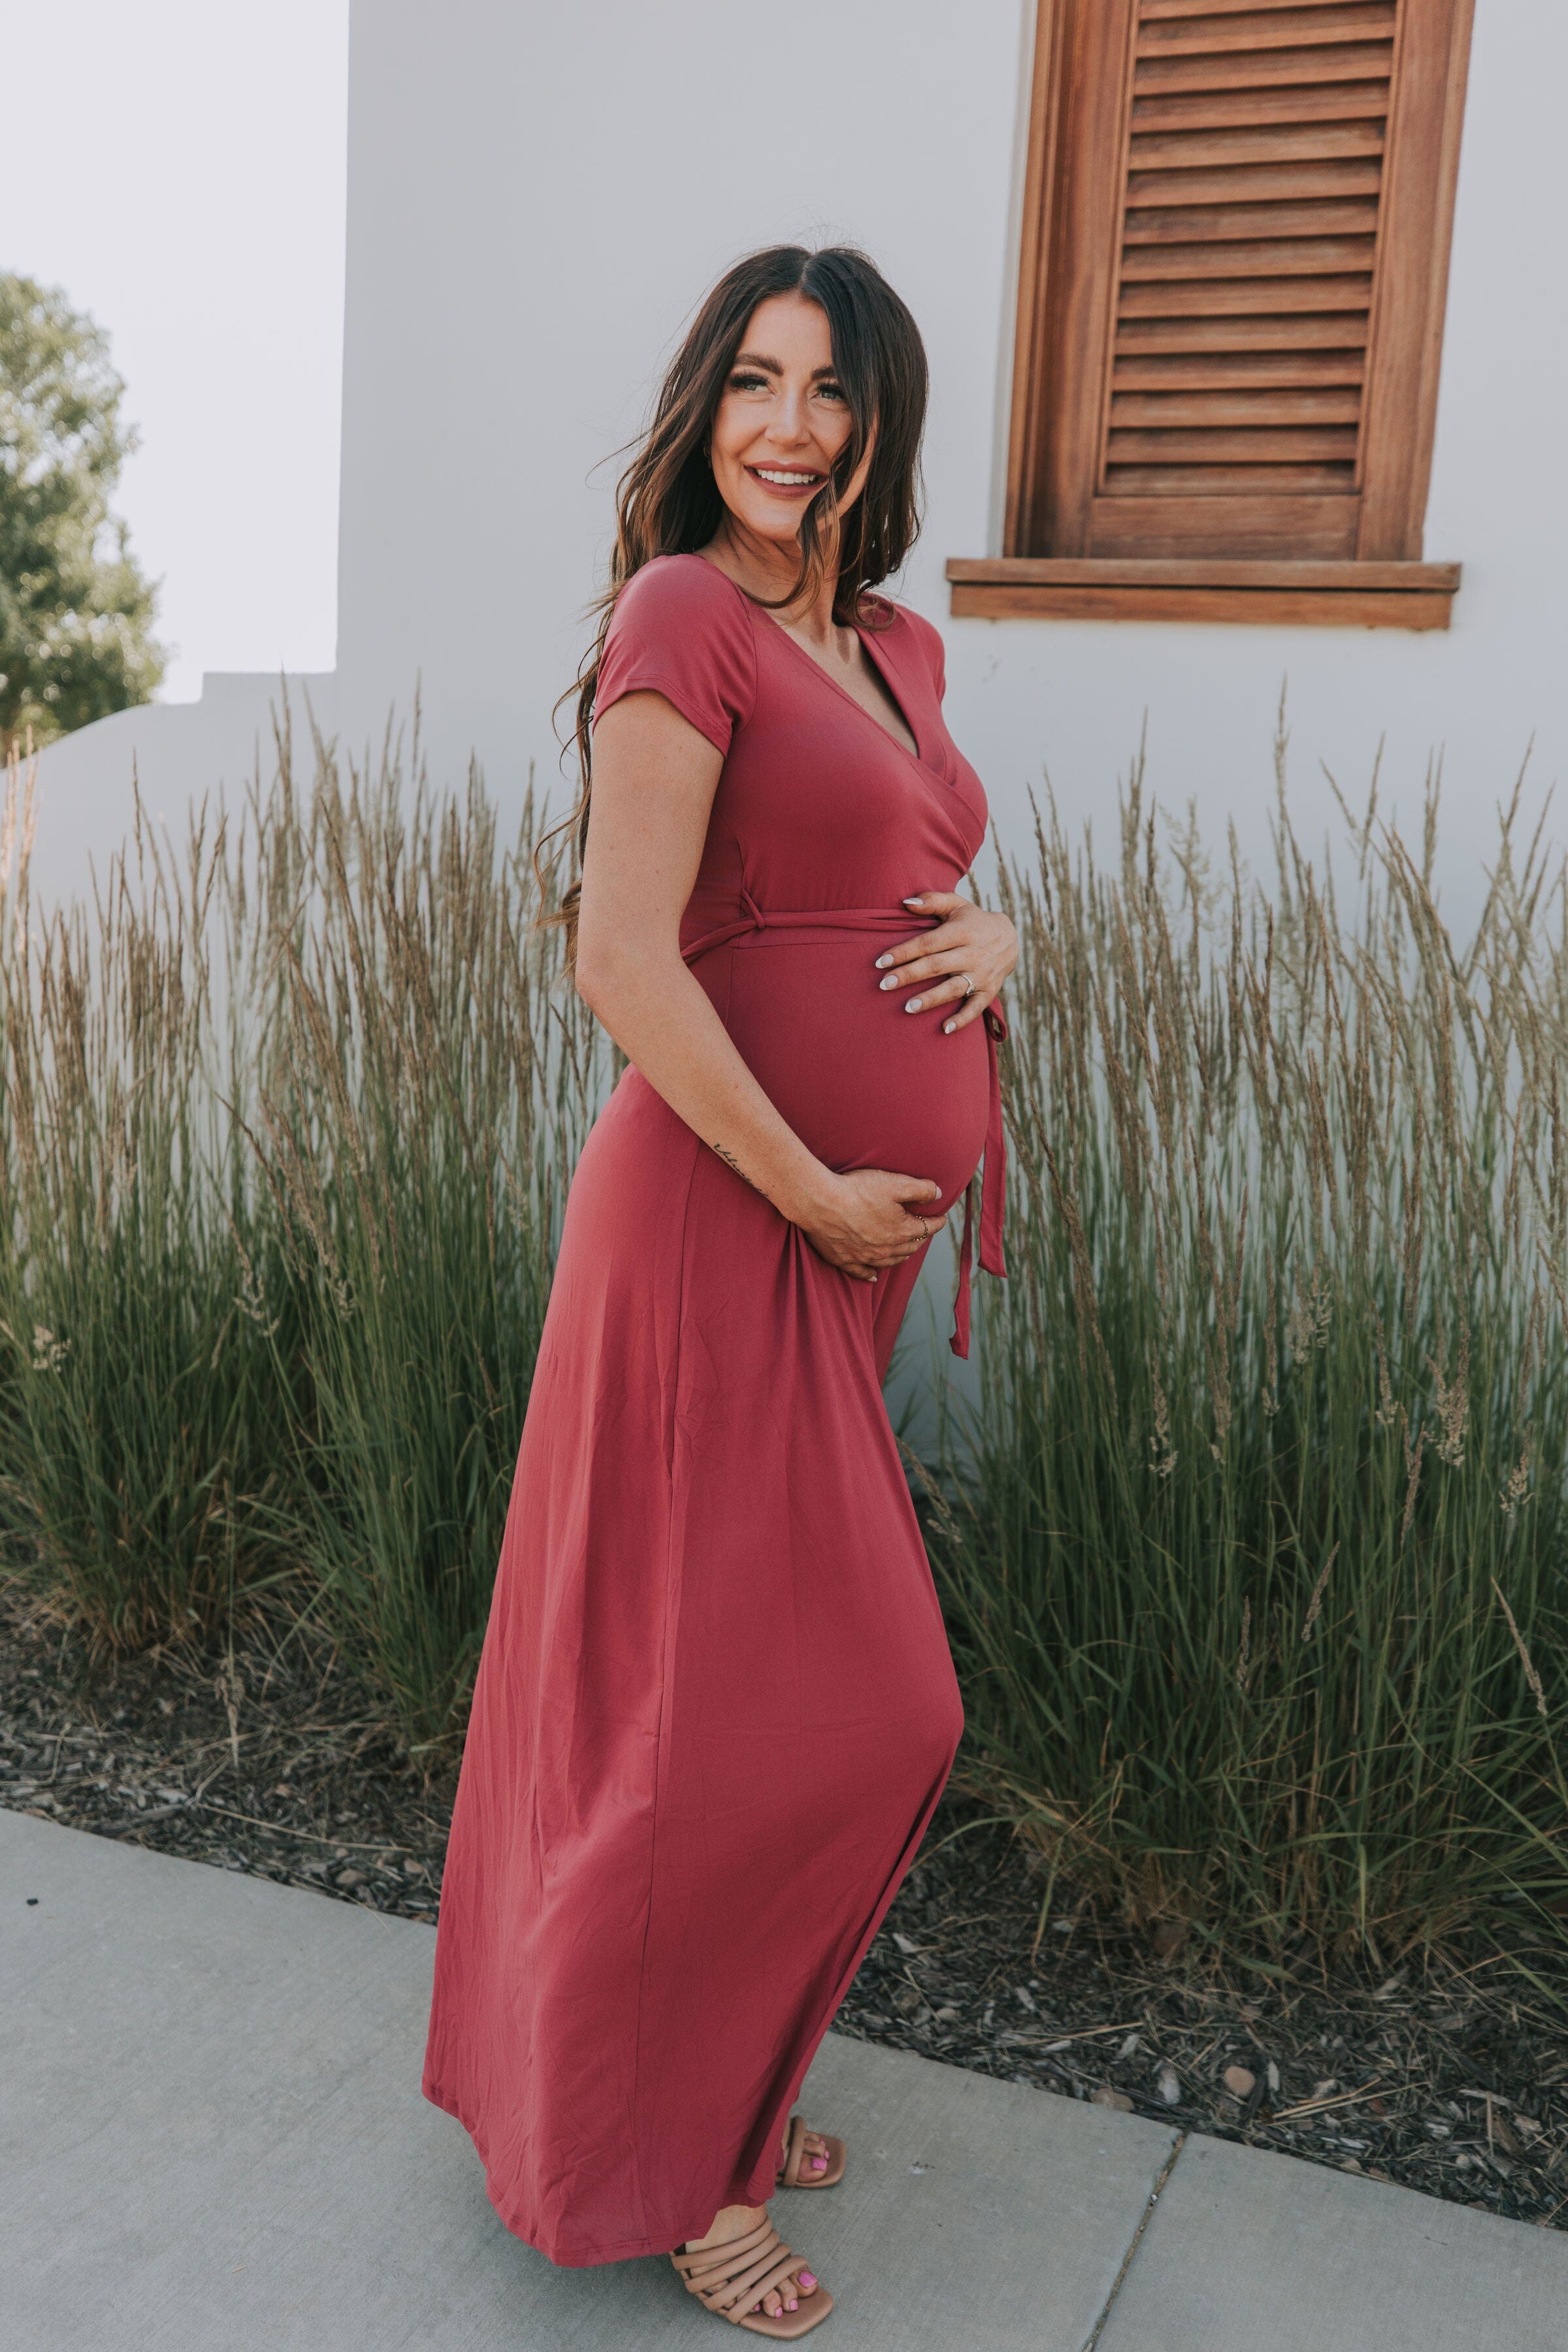 New Addition Maternity Dress - 4 Colors 